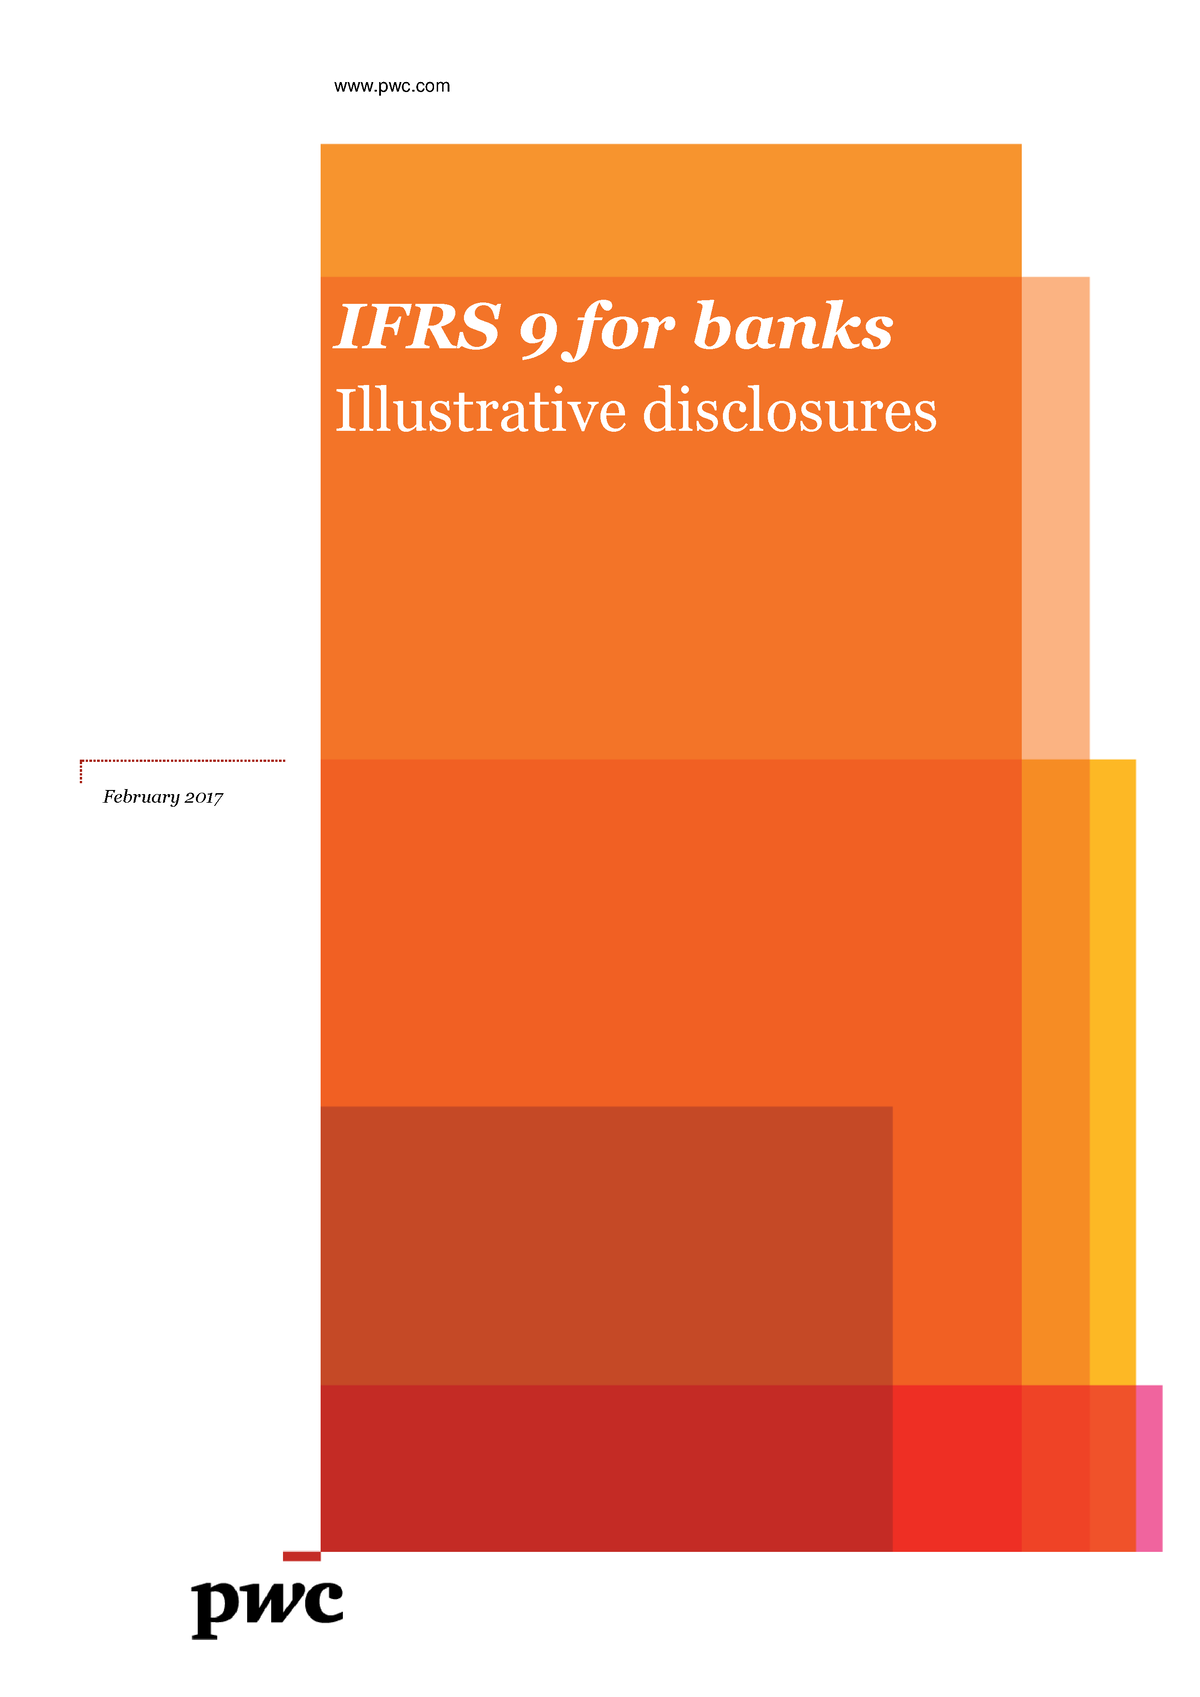 ifrs 9 illustrative examples download